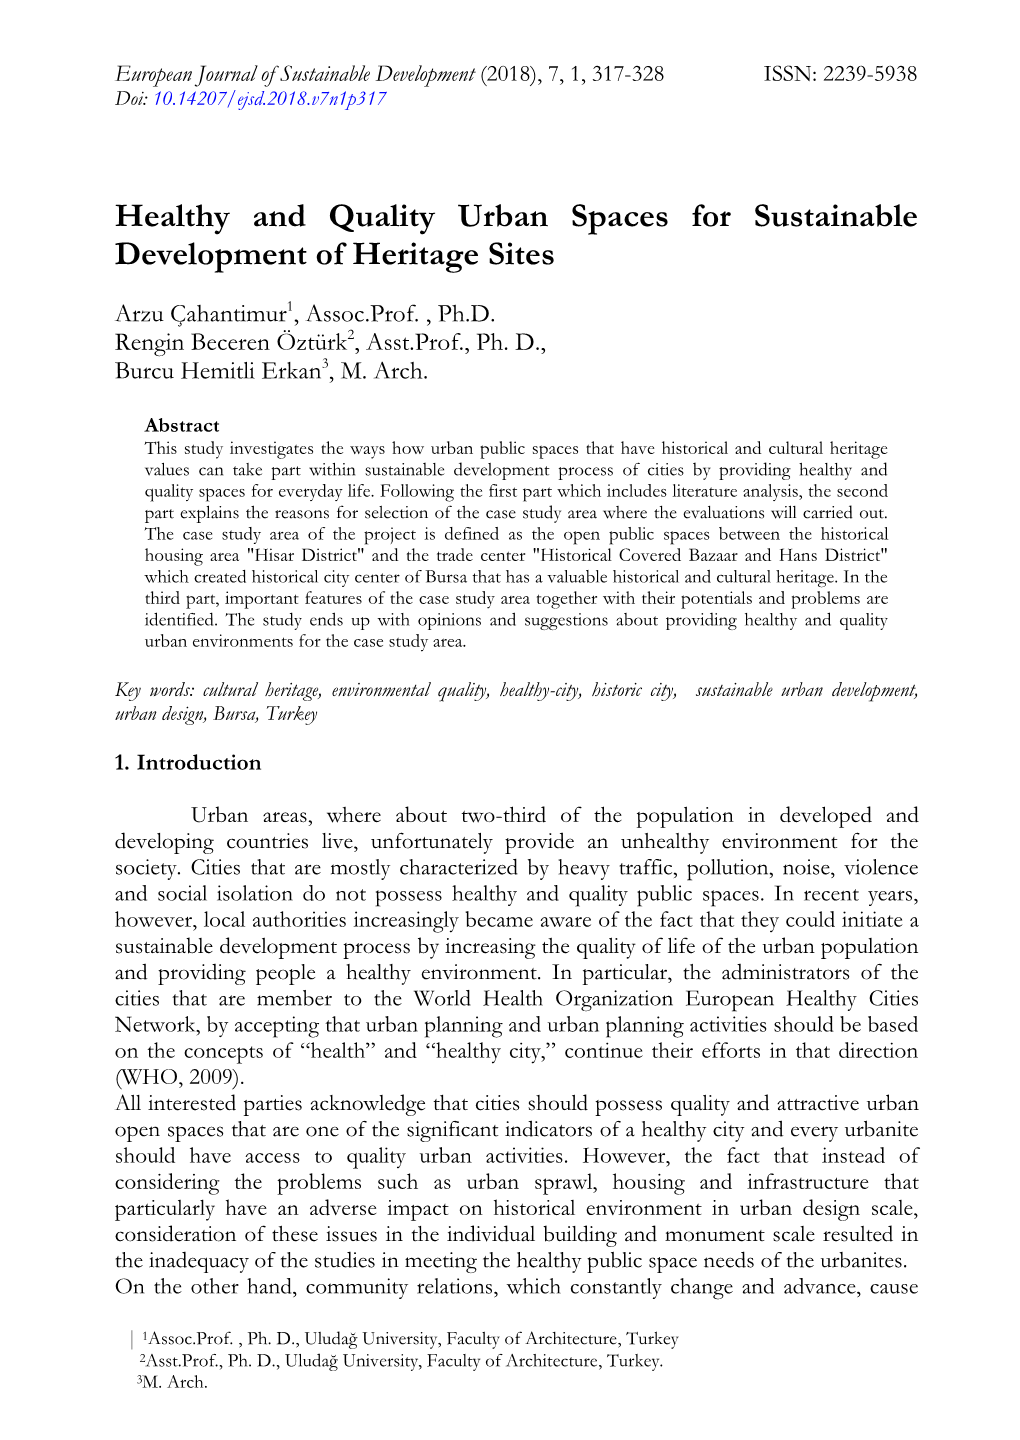 Healthy and Quality Urban Spaces for Sustainable Development of Heritage Sites